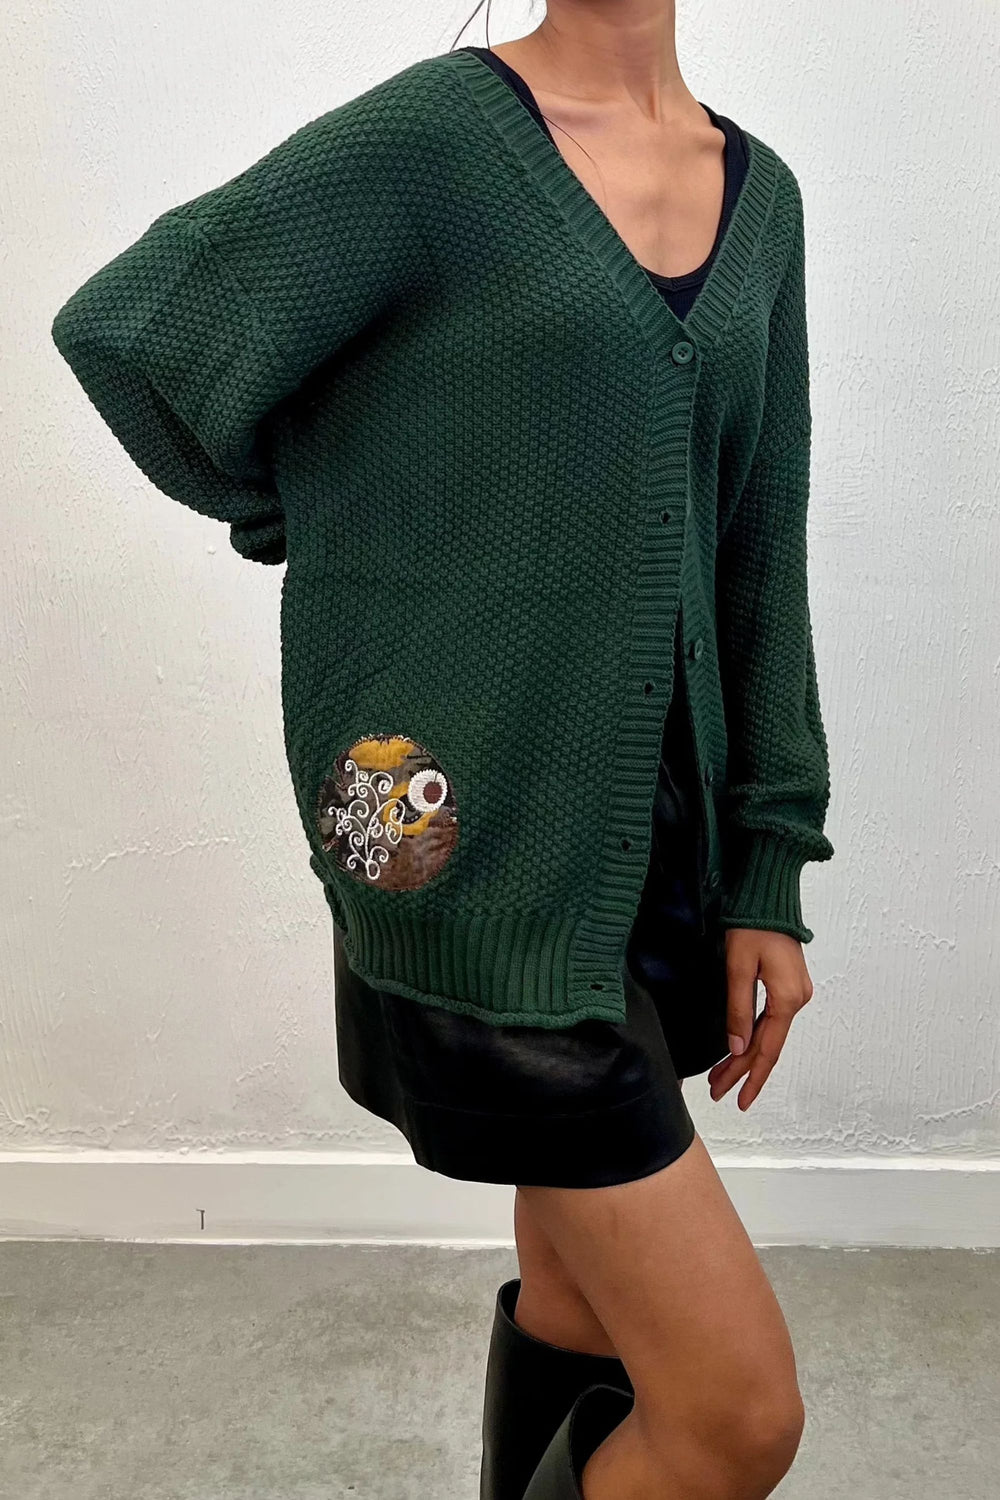 Comfortable dark green knit cardigan with buttons